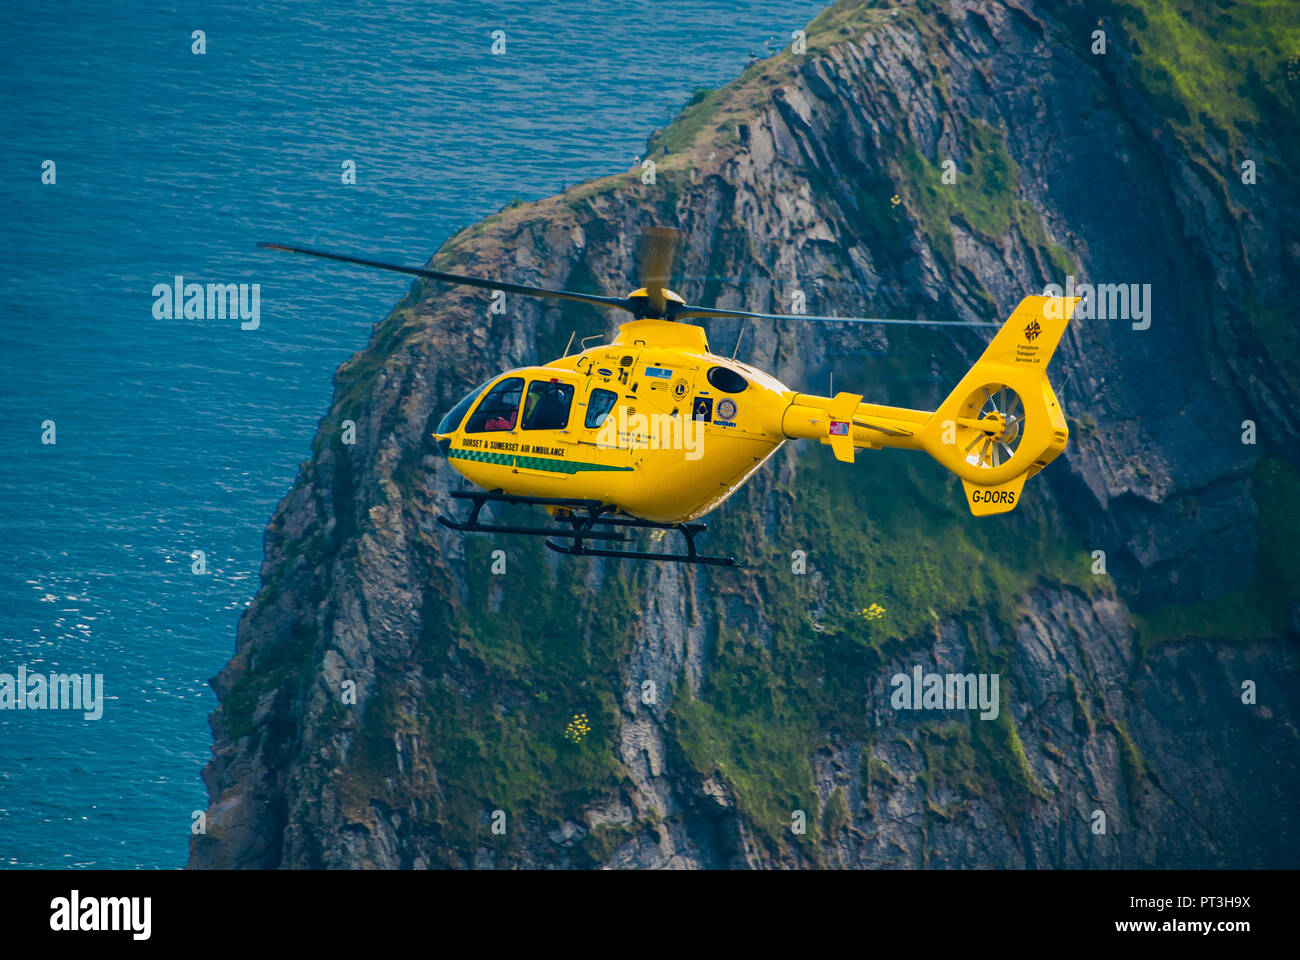 A rescue Helicopter flying near a rock face in Dorset, United Kingdom. Stock Photo